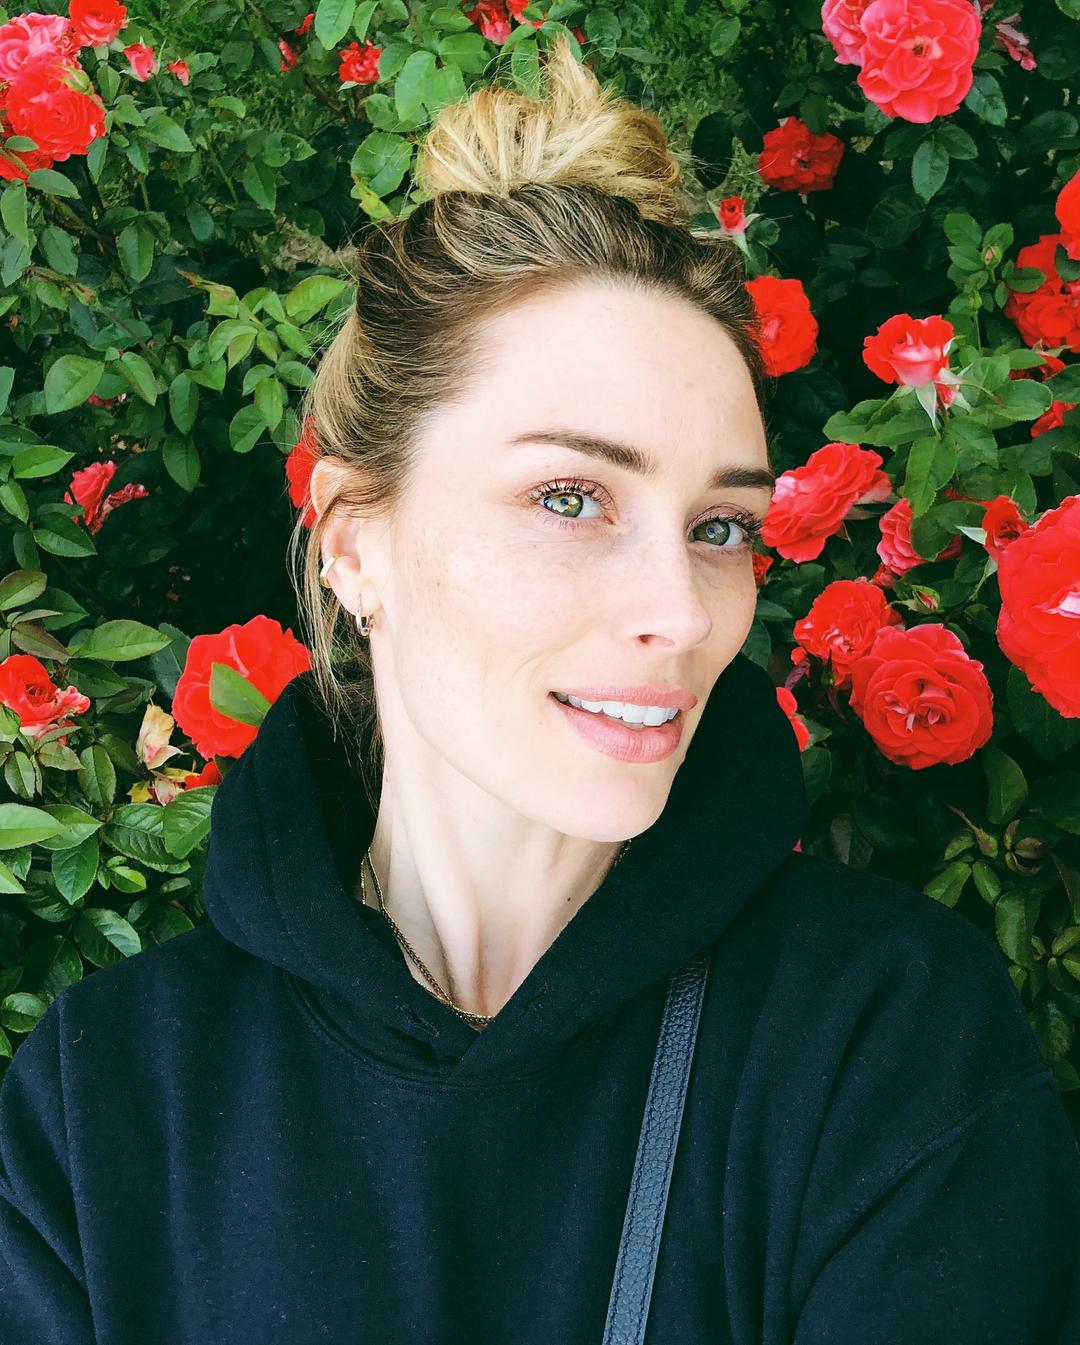 49 Hot Pictures Of Arielle Vandenberg Are Heaven On Earth | Best Of Comic Books